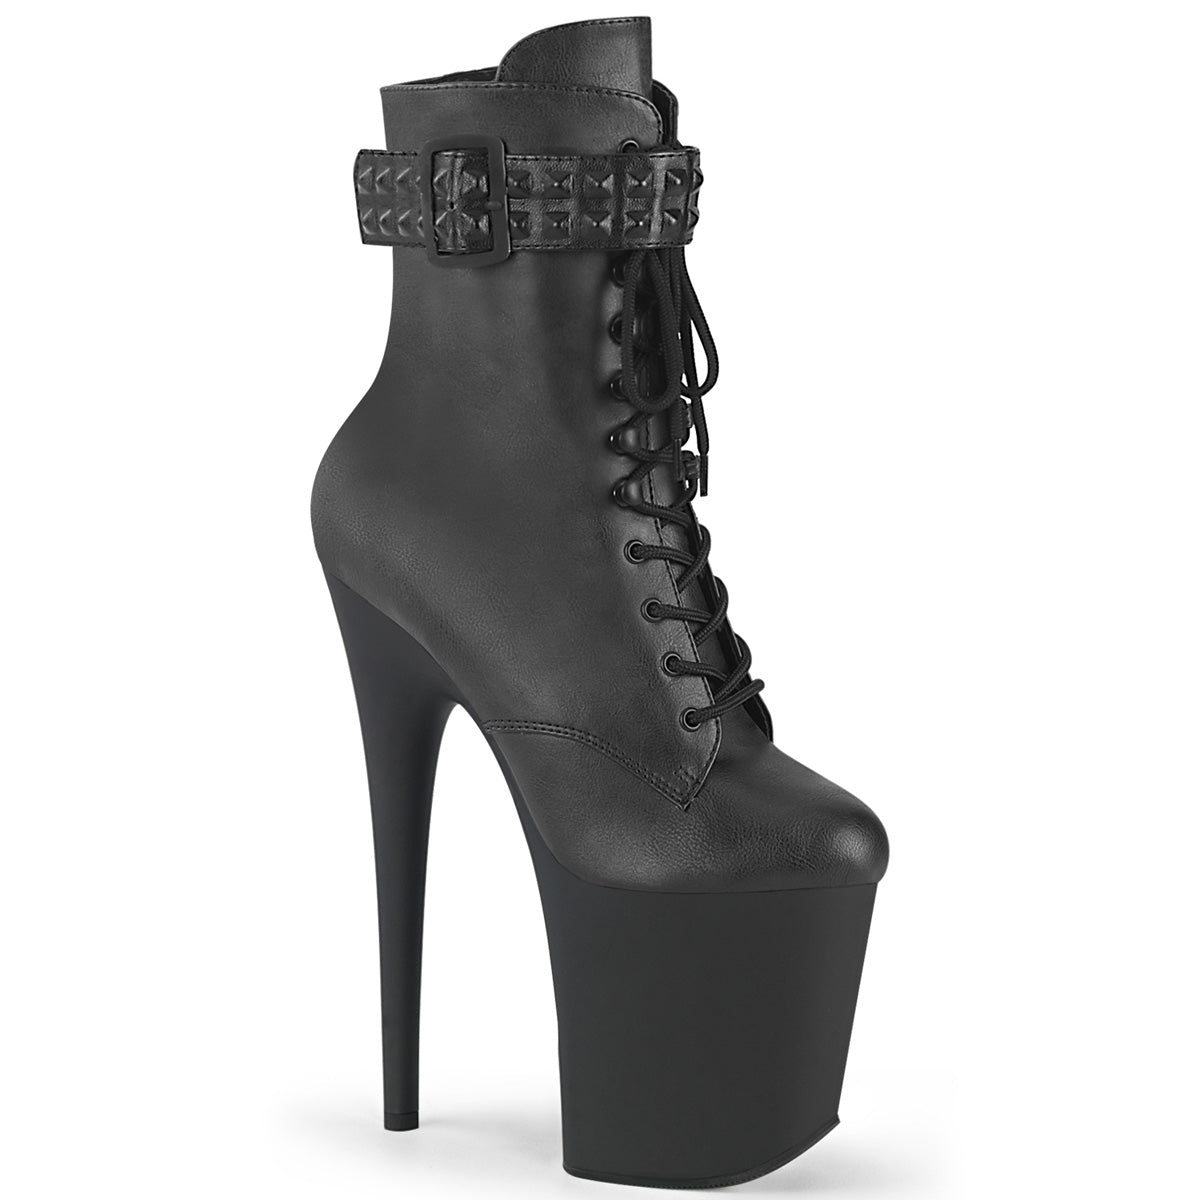 FLAMINGO-1020STR Pleaser Black Faux Leather Exotic Dancing Ankle Boots